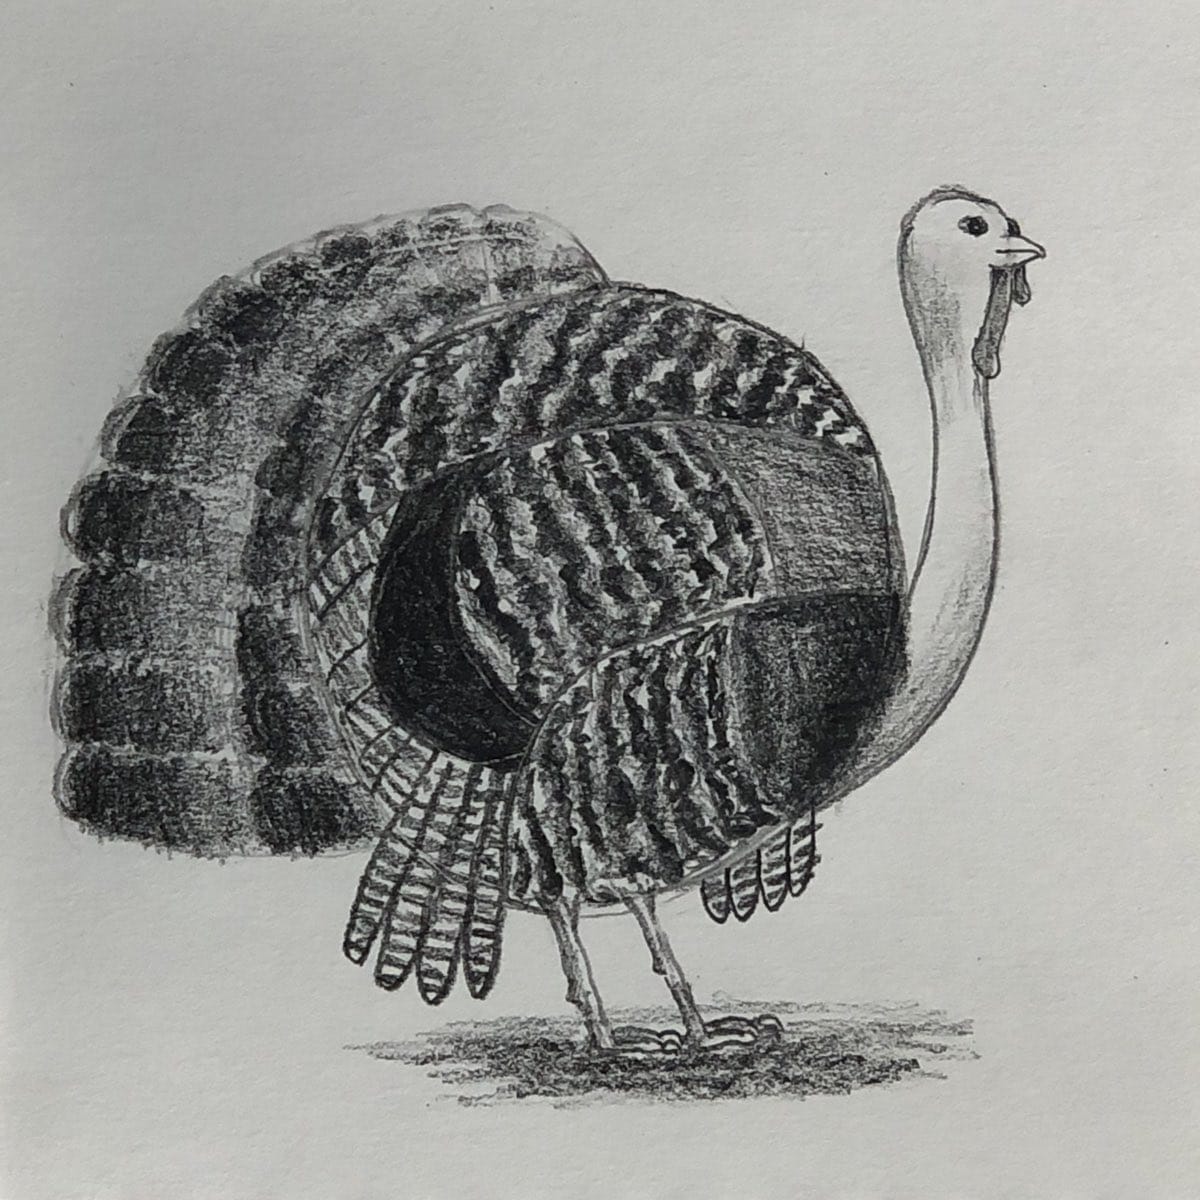 Completed drawing of a realistic turkey with a shadow added around its feet.